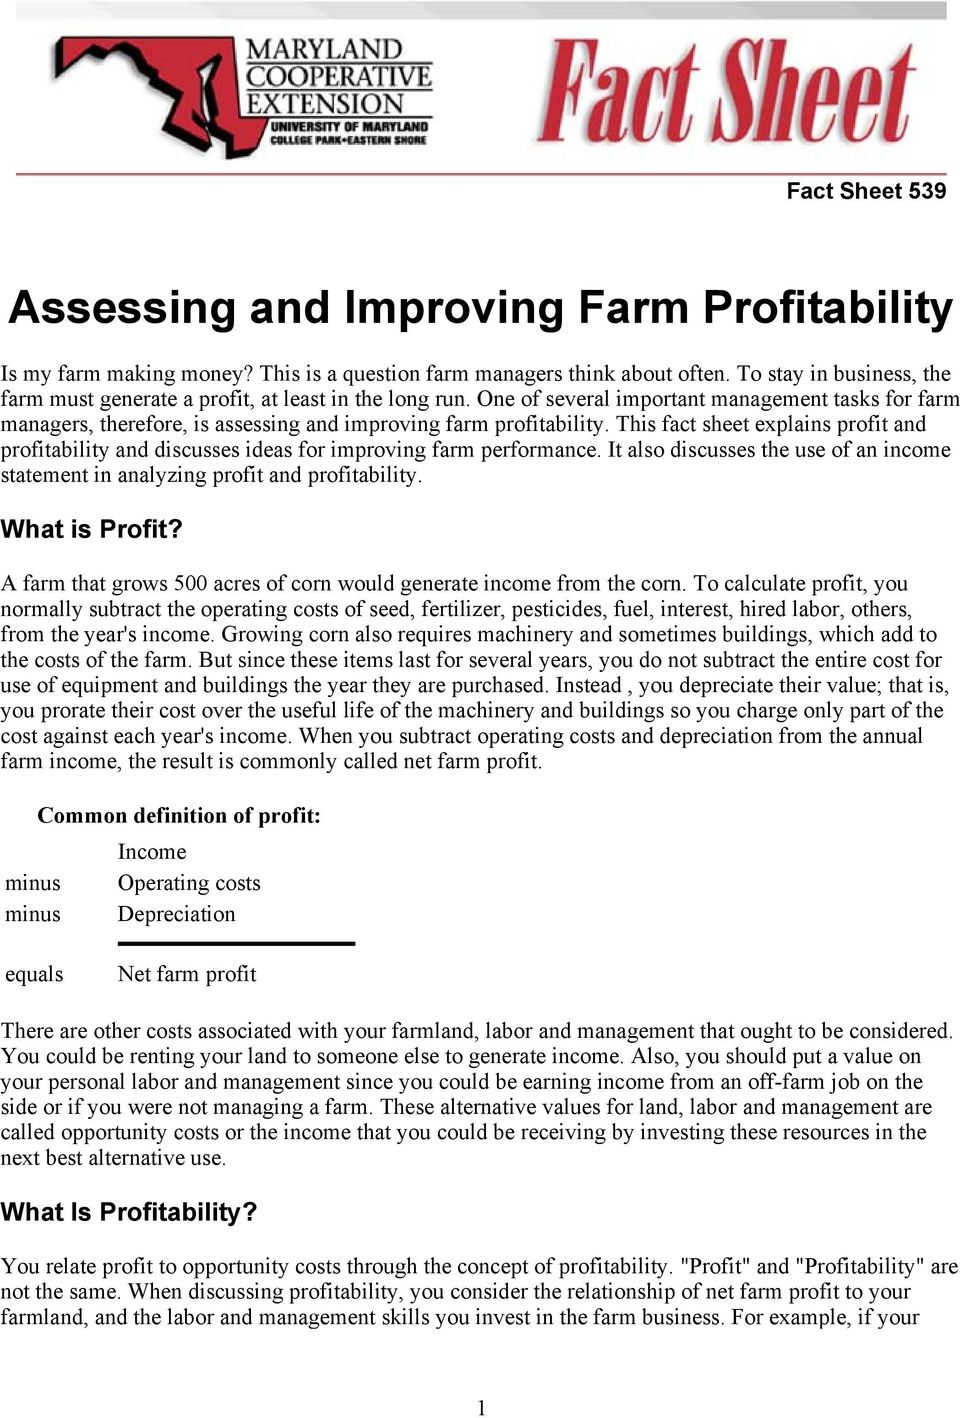 This fact sheet explains profit and profitability and discusses ideas for improving farm performance. It also discusses the use of an income statement in analyzing profit and profitability.